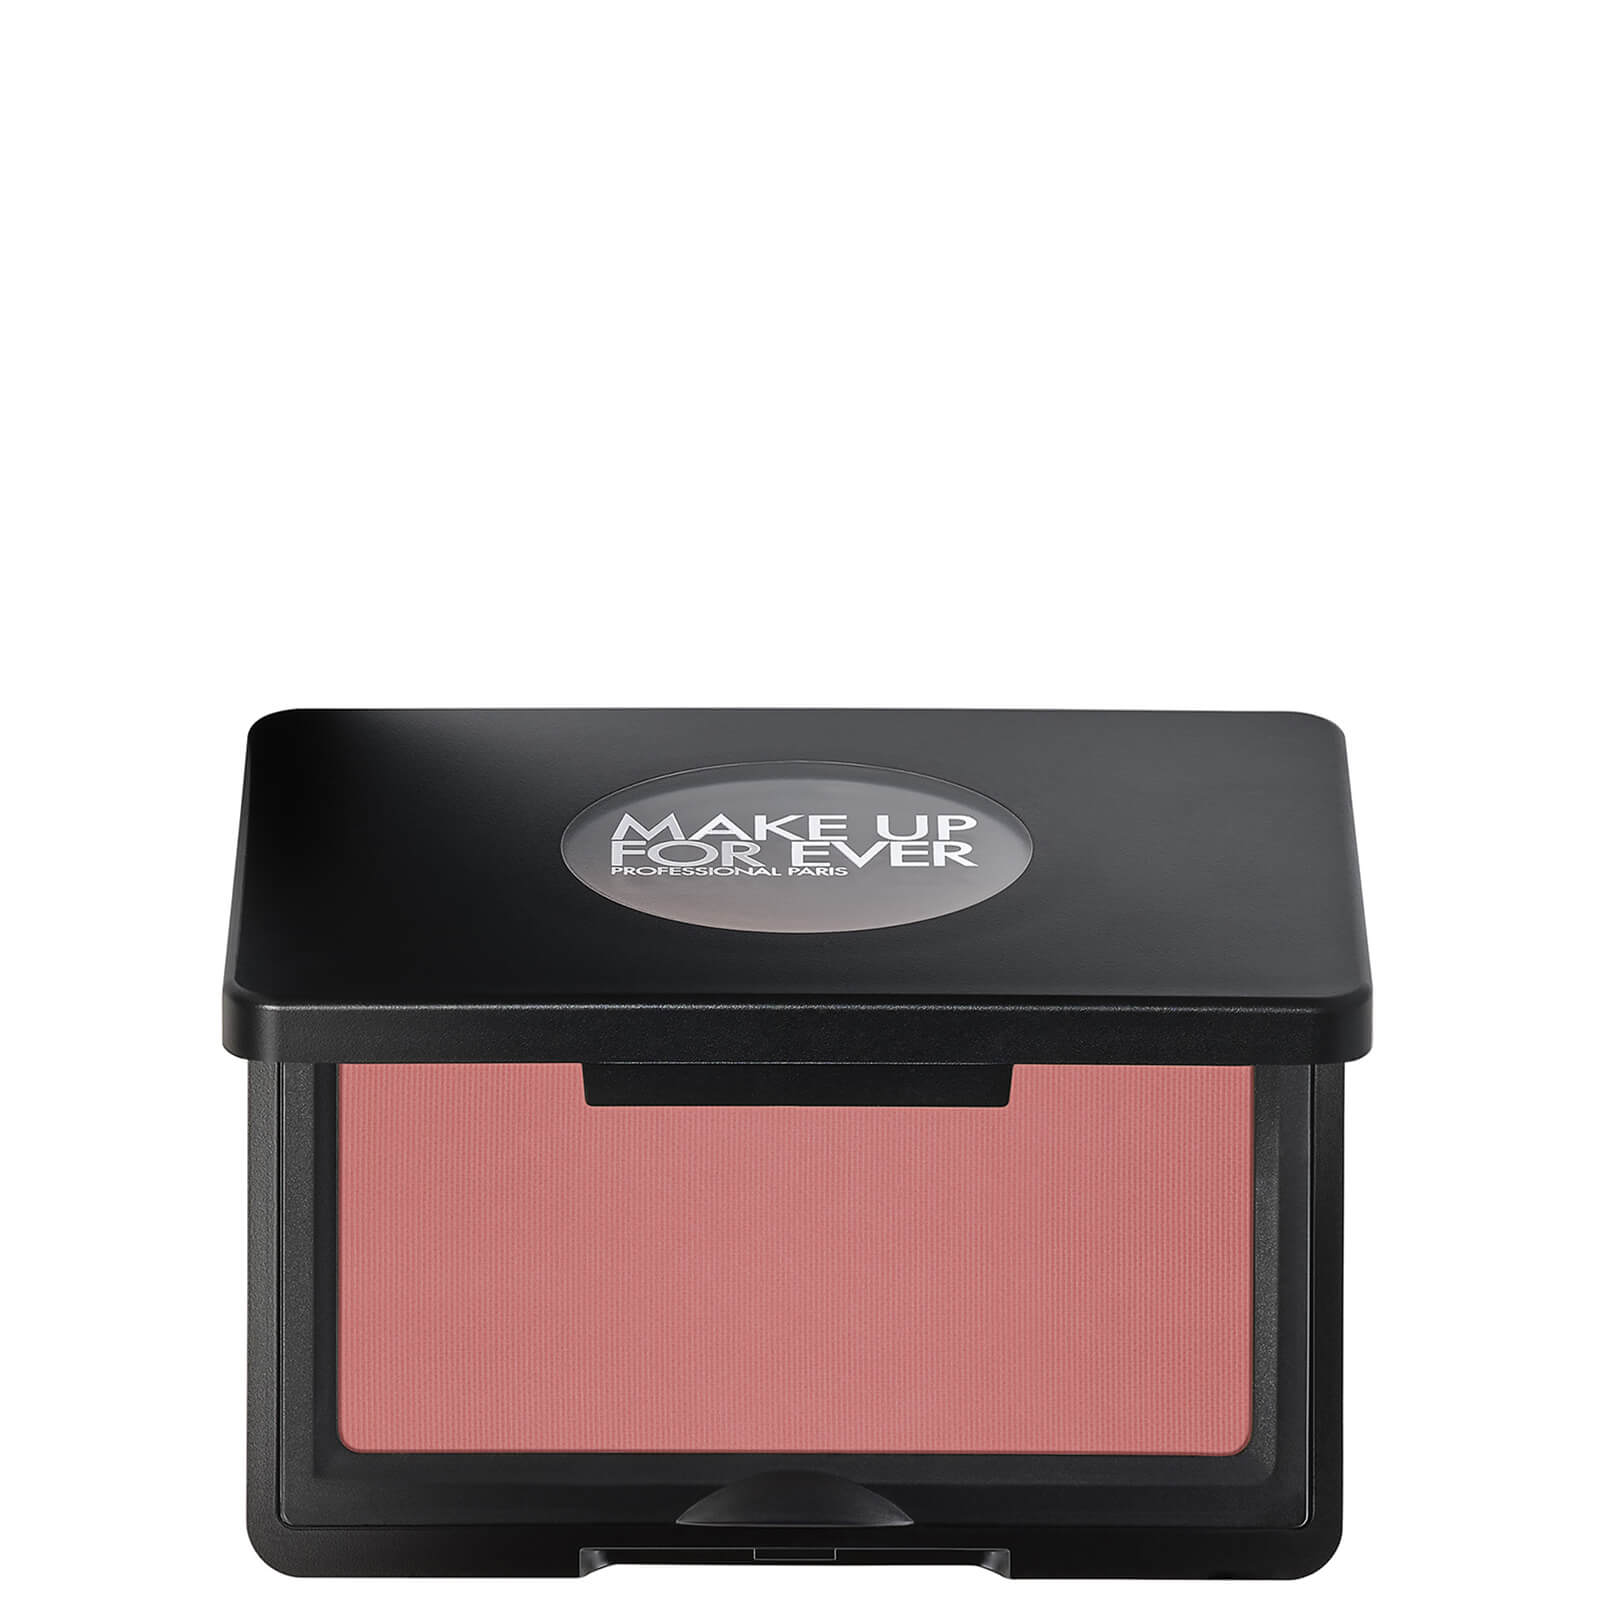 MAKE UP FOR EVER Artist Face Powders Blush 4g (Various Shades) - B230 - Wherever Rose